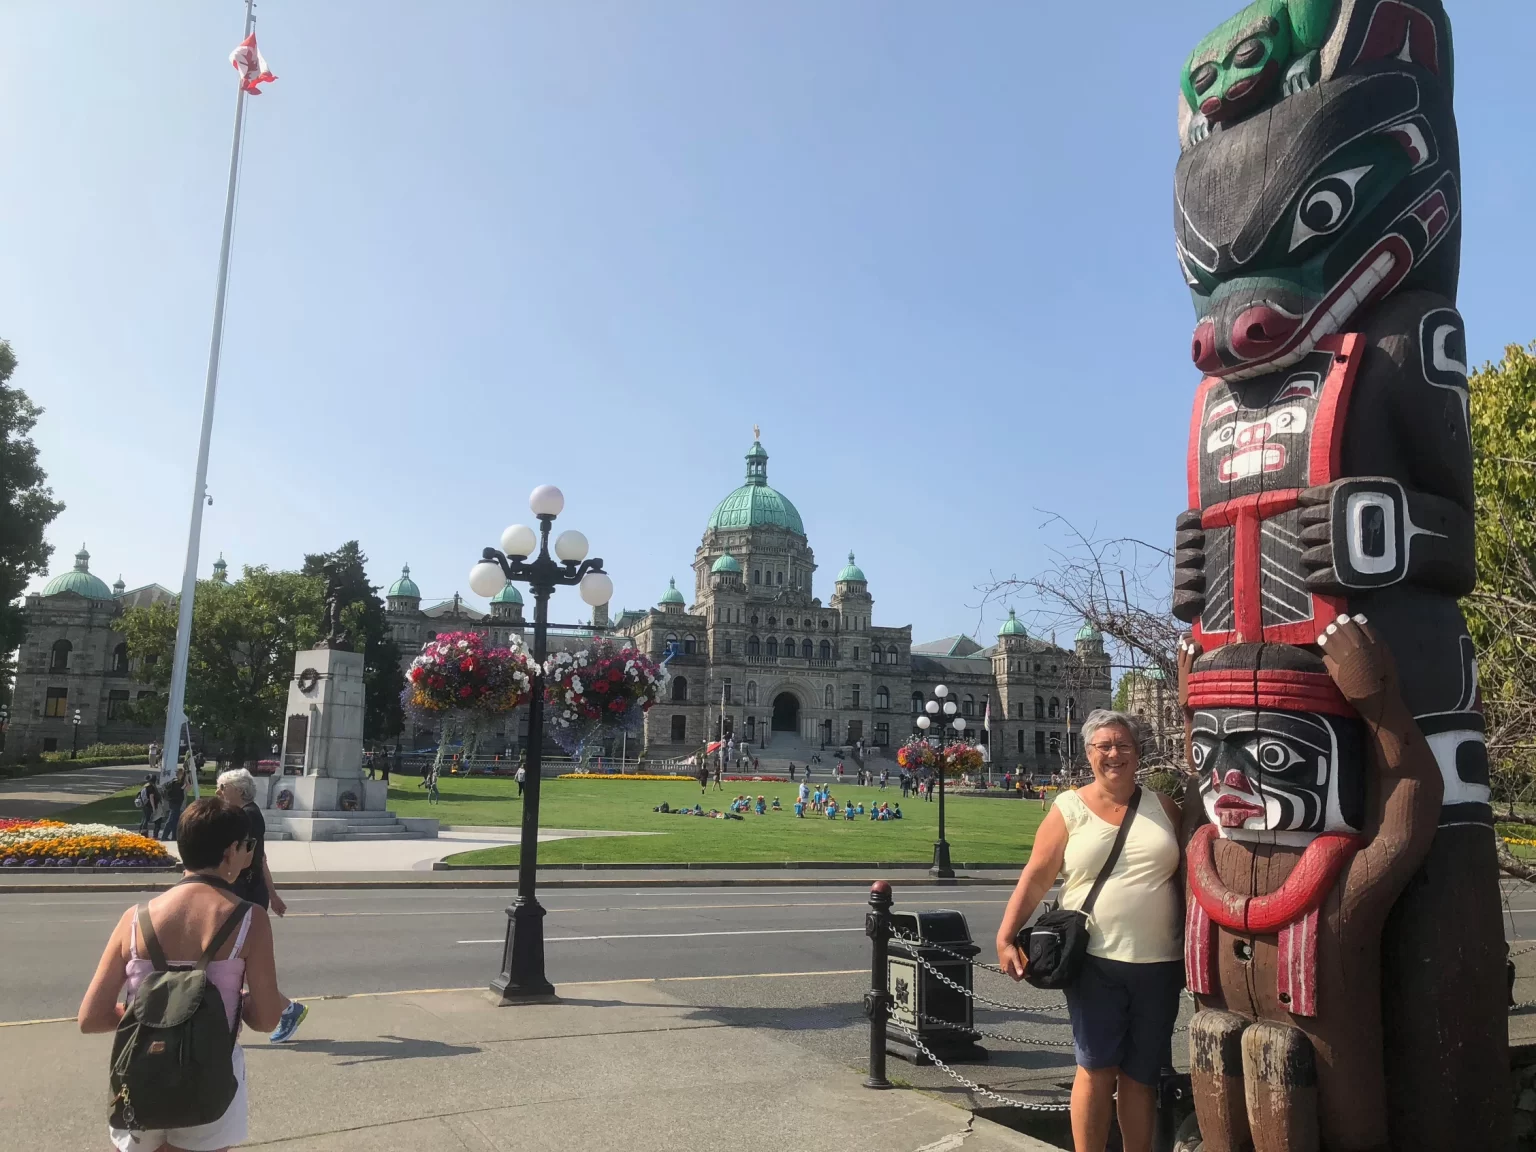 Canada – Vancouver Island – Day 17